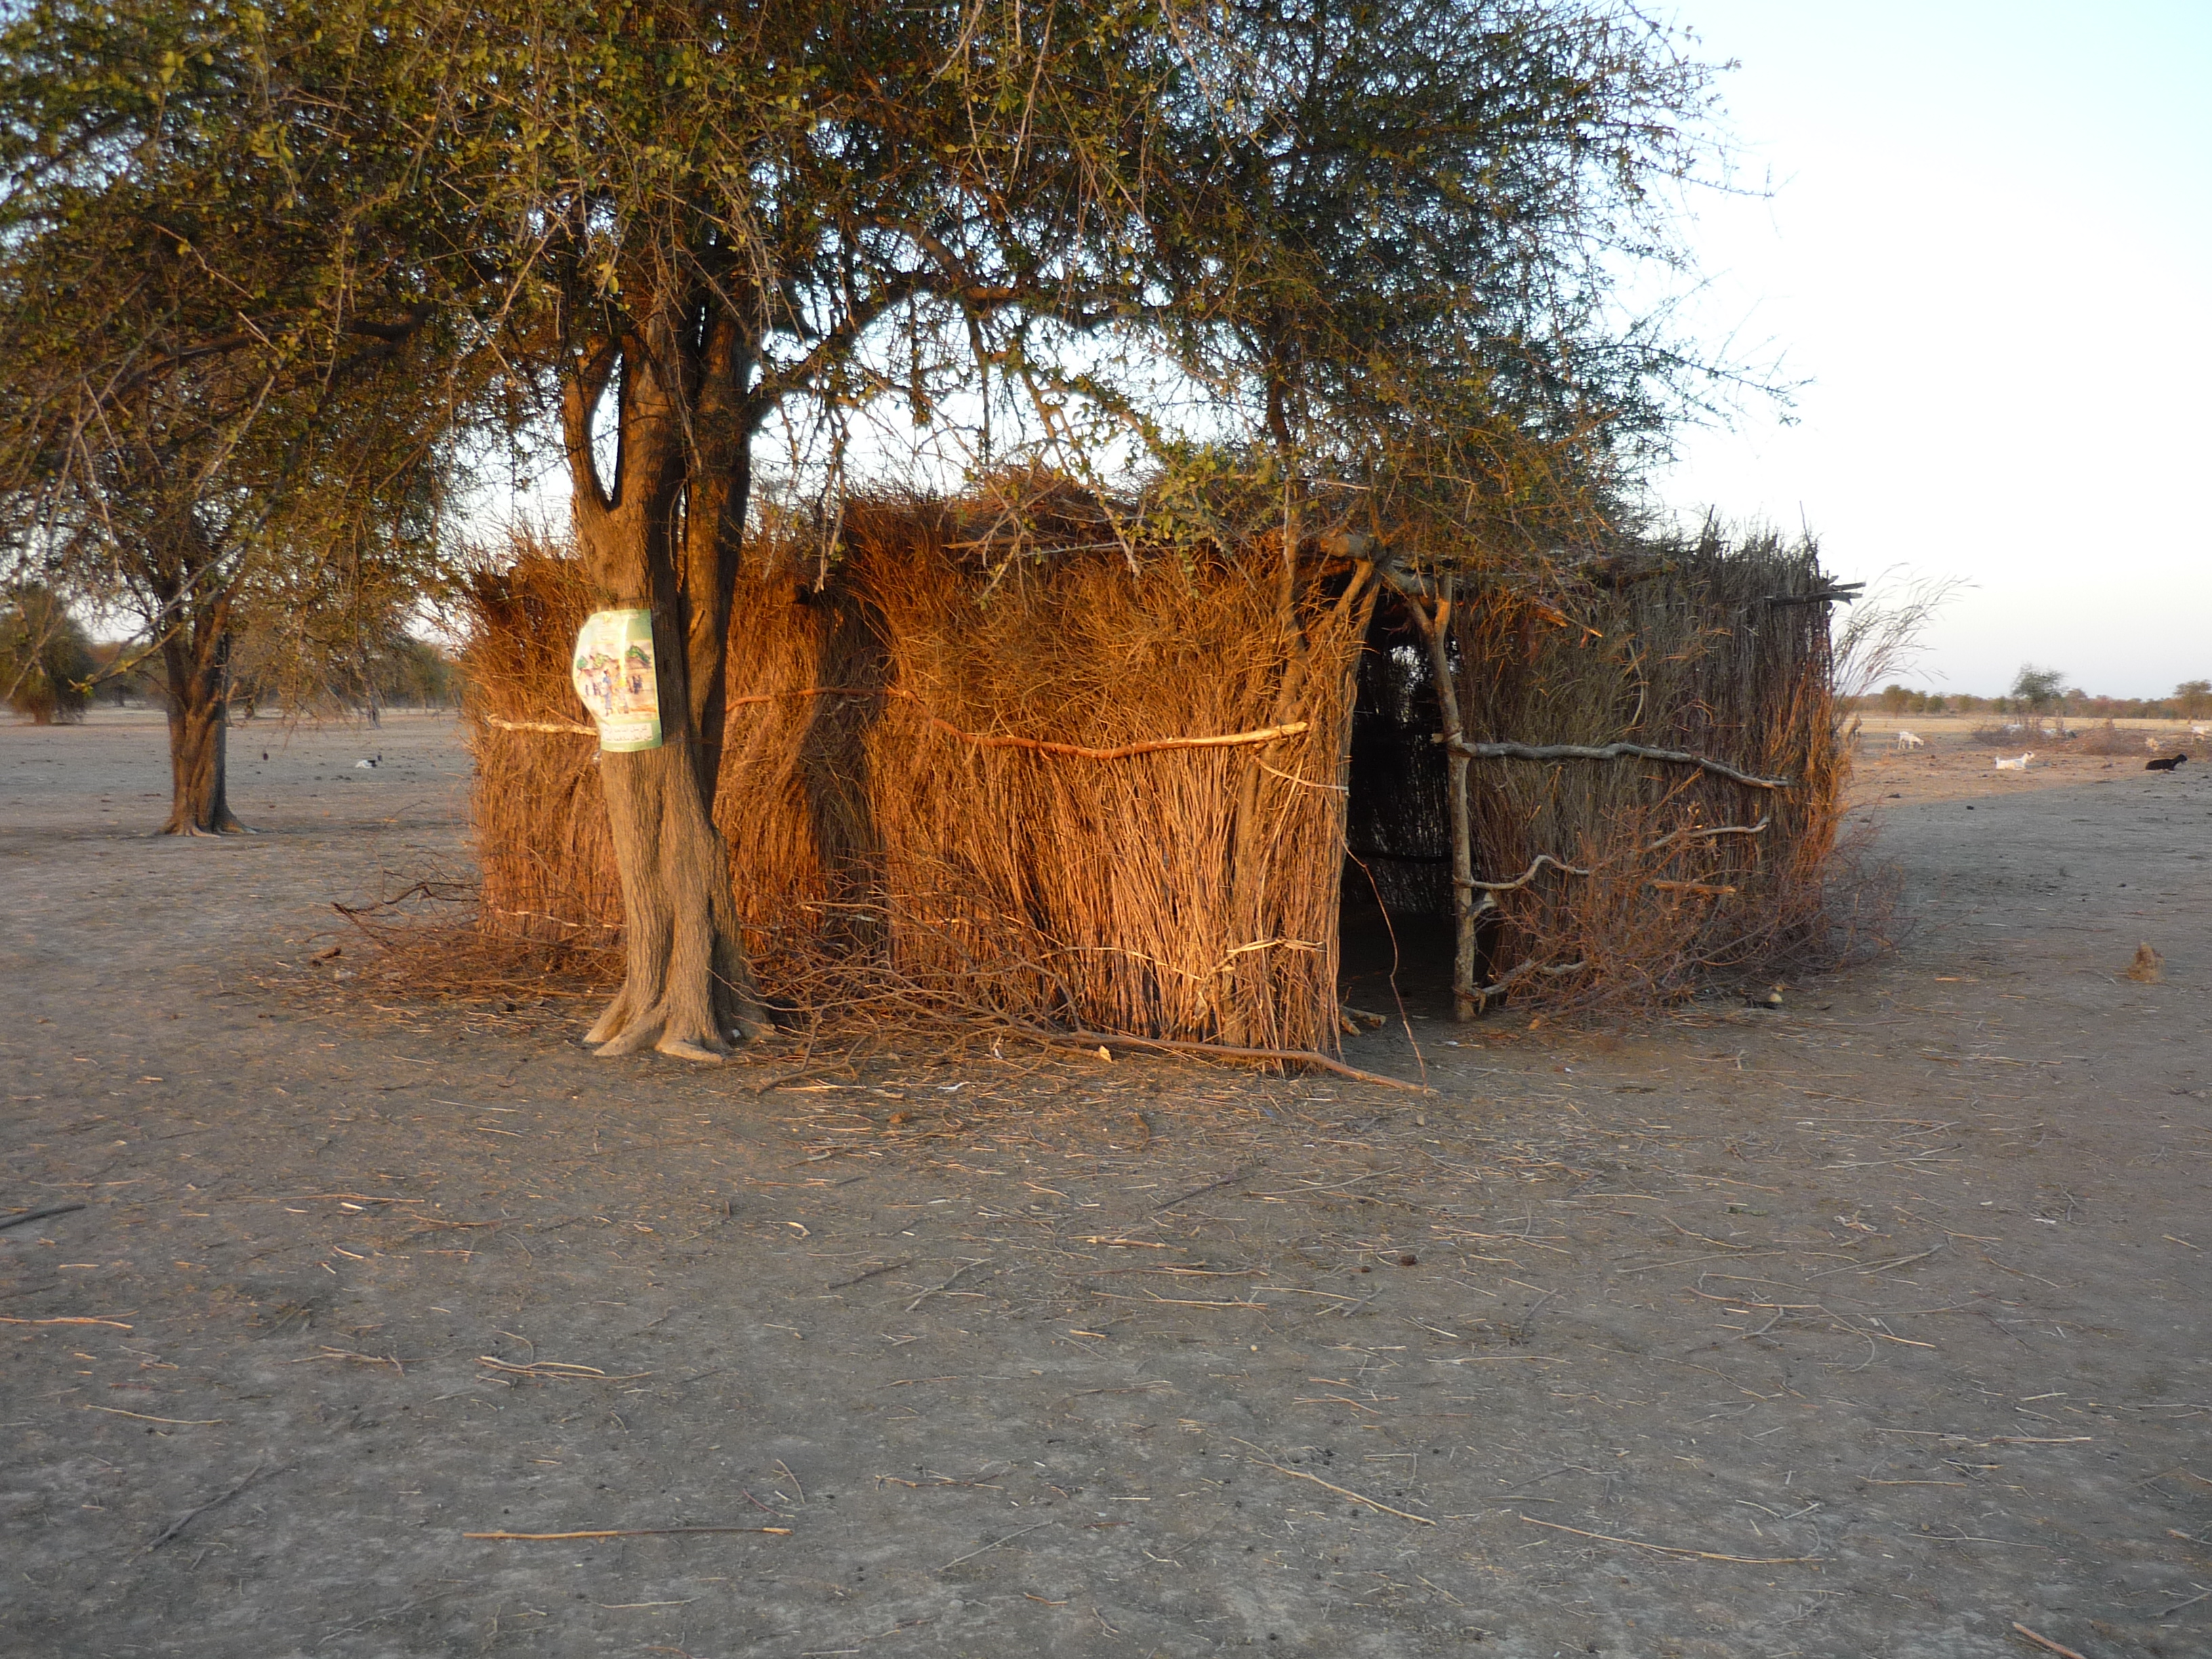 The first school building, permanent nomadic village, Central Chad